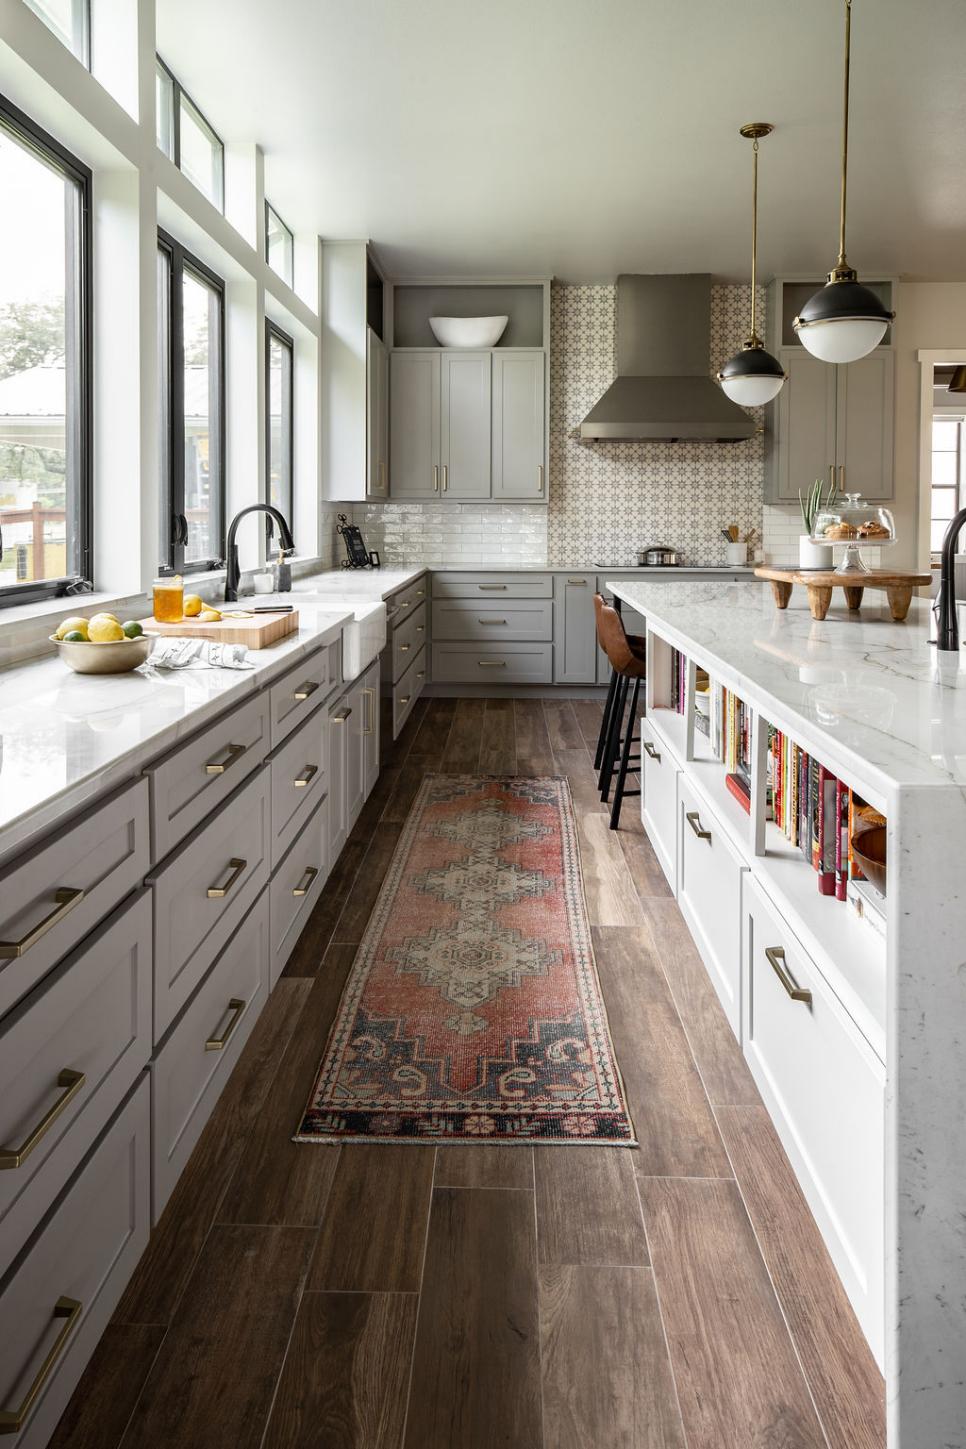 Antique Kitchens 2021 5 kitchen trends for 2021 you don't want to miss ...